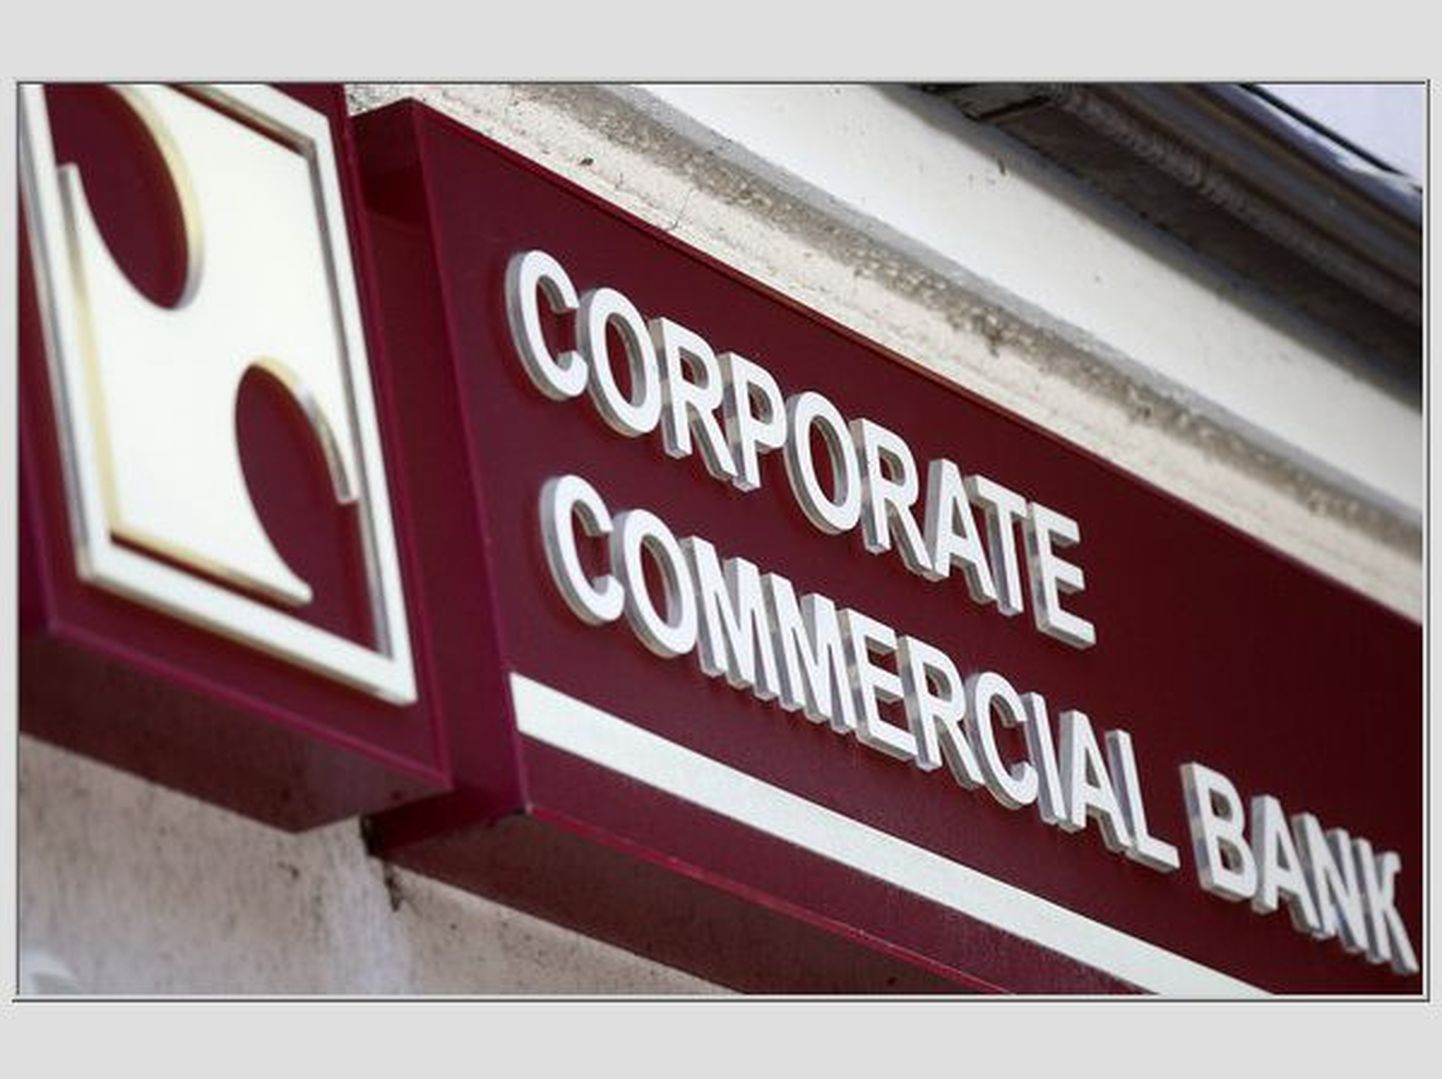 Corporate Commercial Bank.